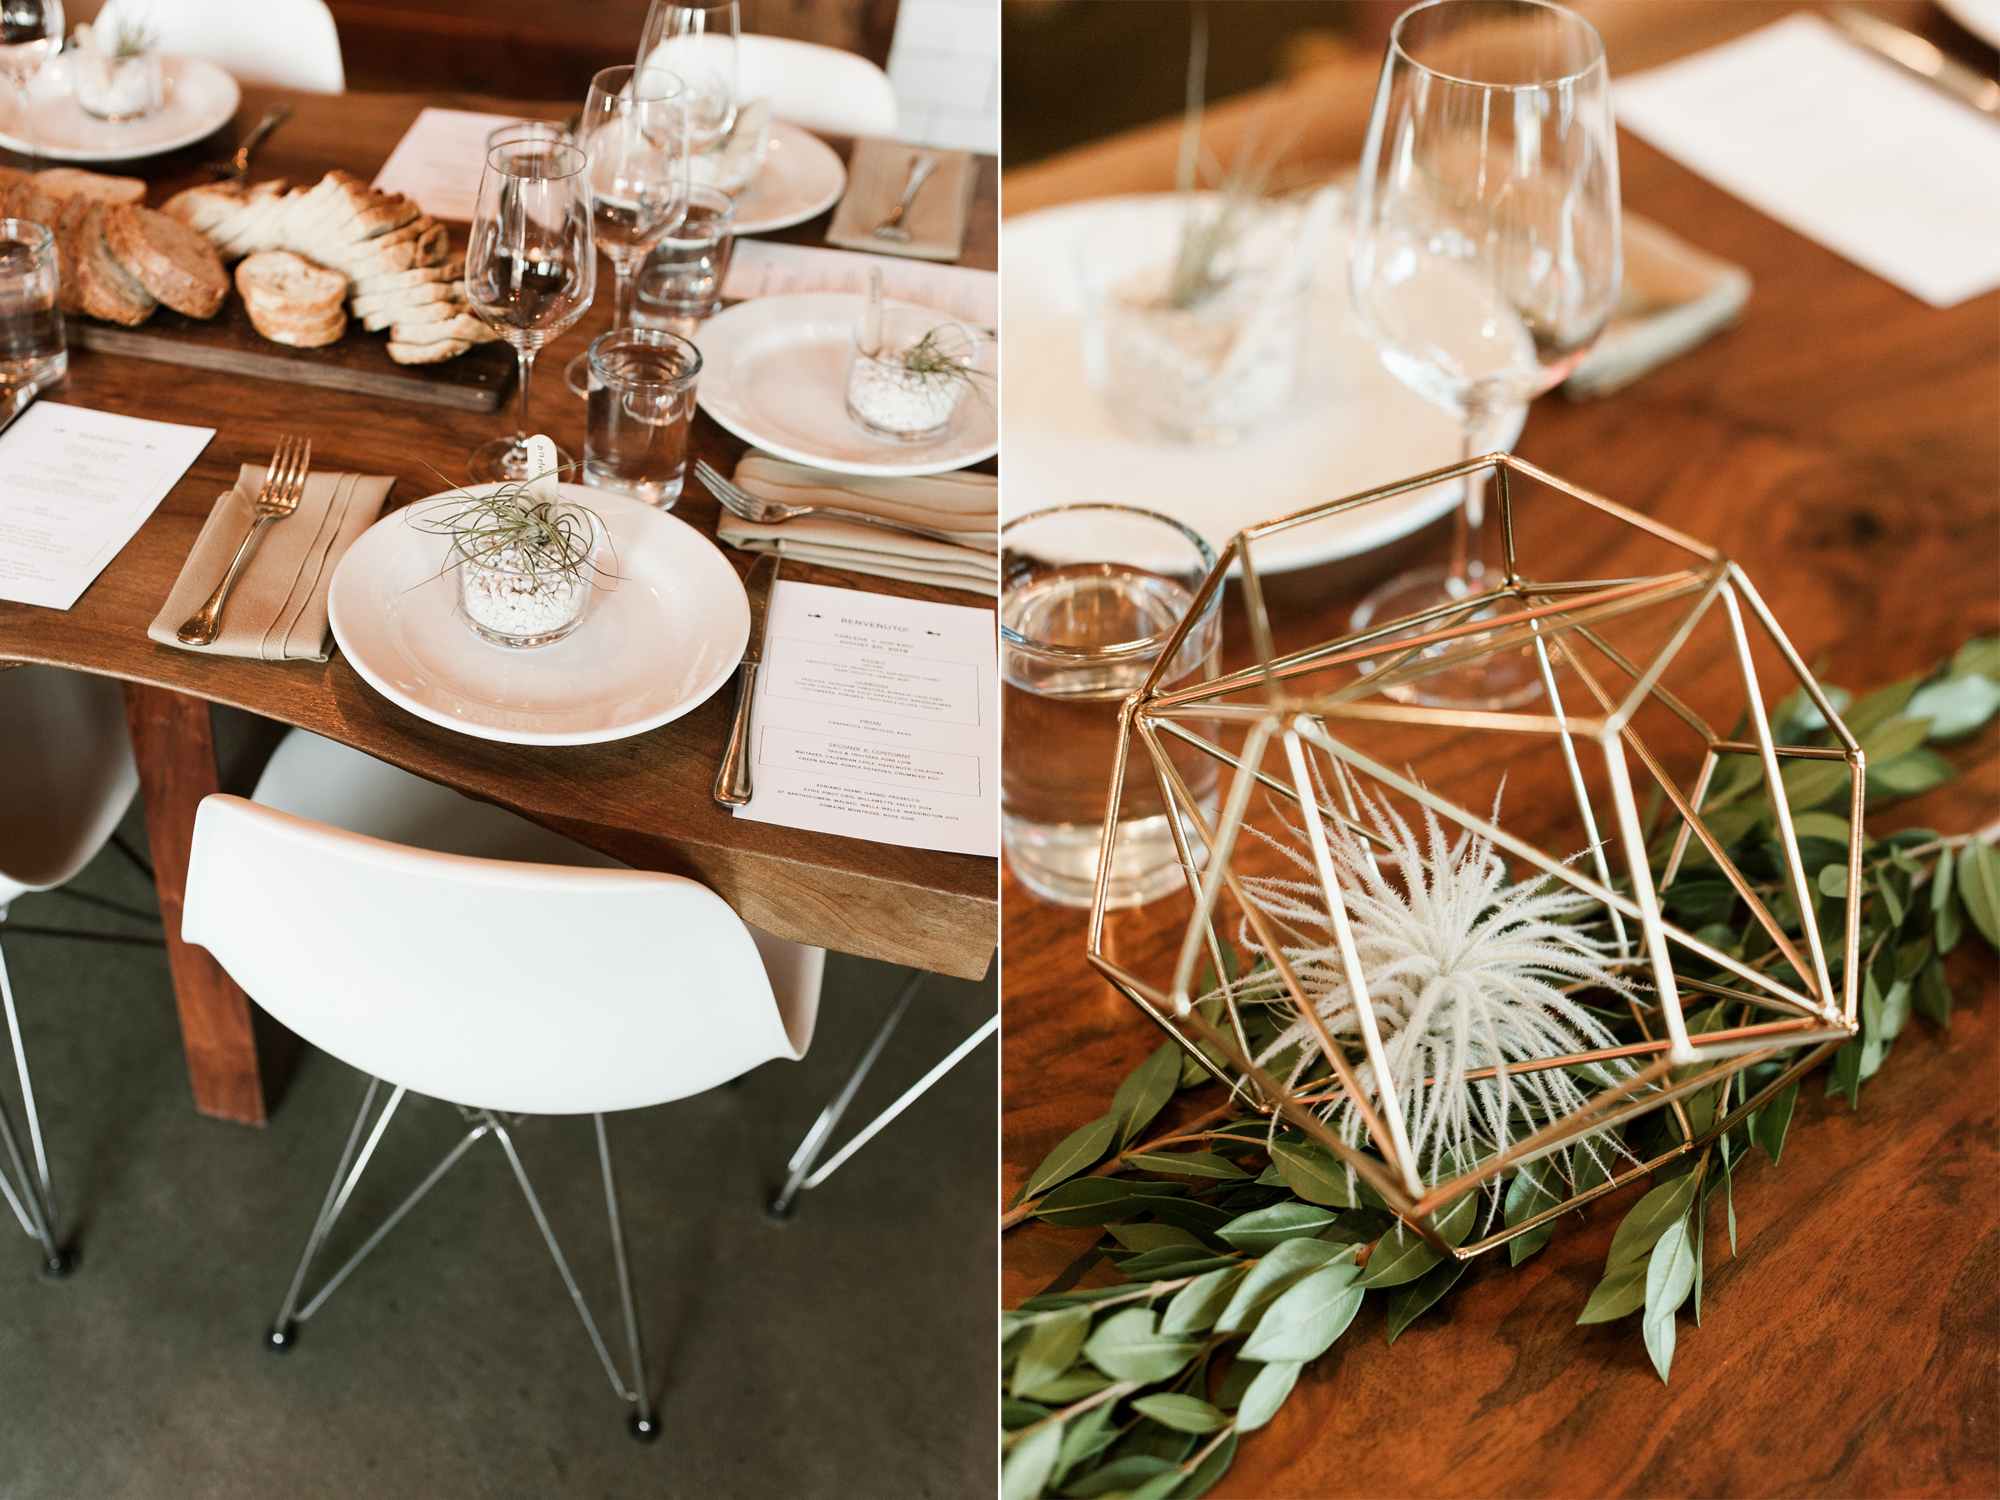 Table details of a wedding reception at Roman Candle in Portland, Oregon. By wedding photographer Briana Morrison